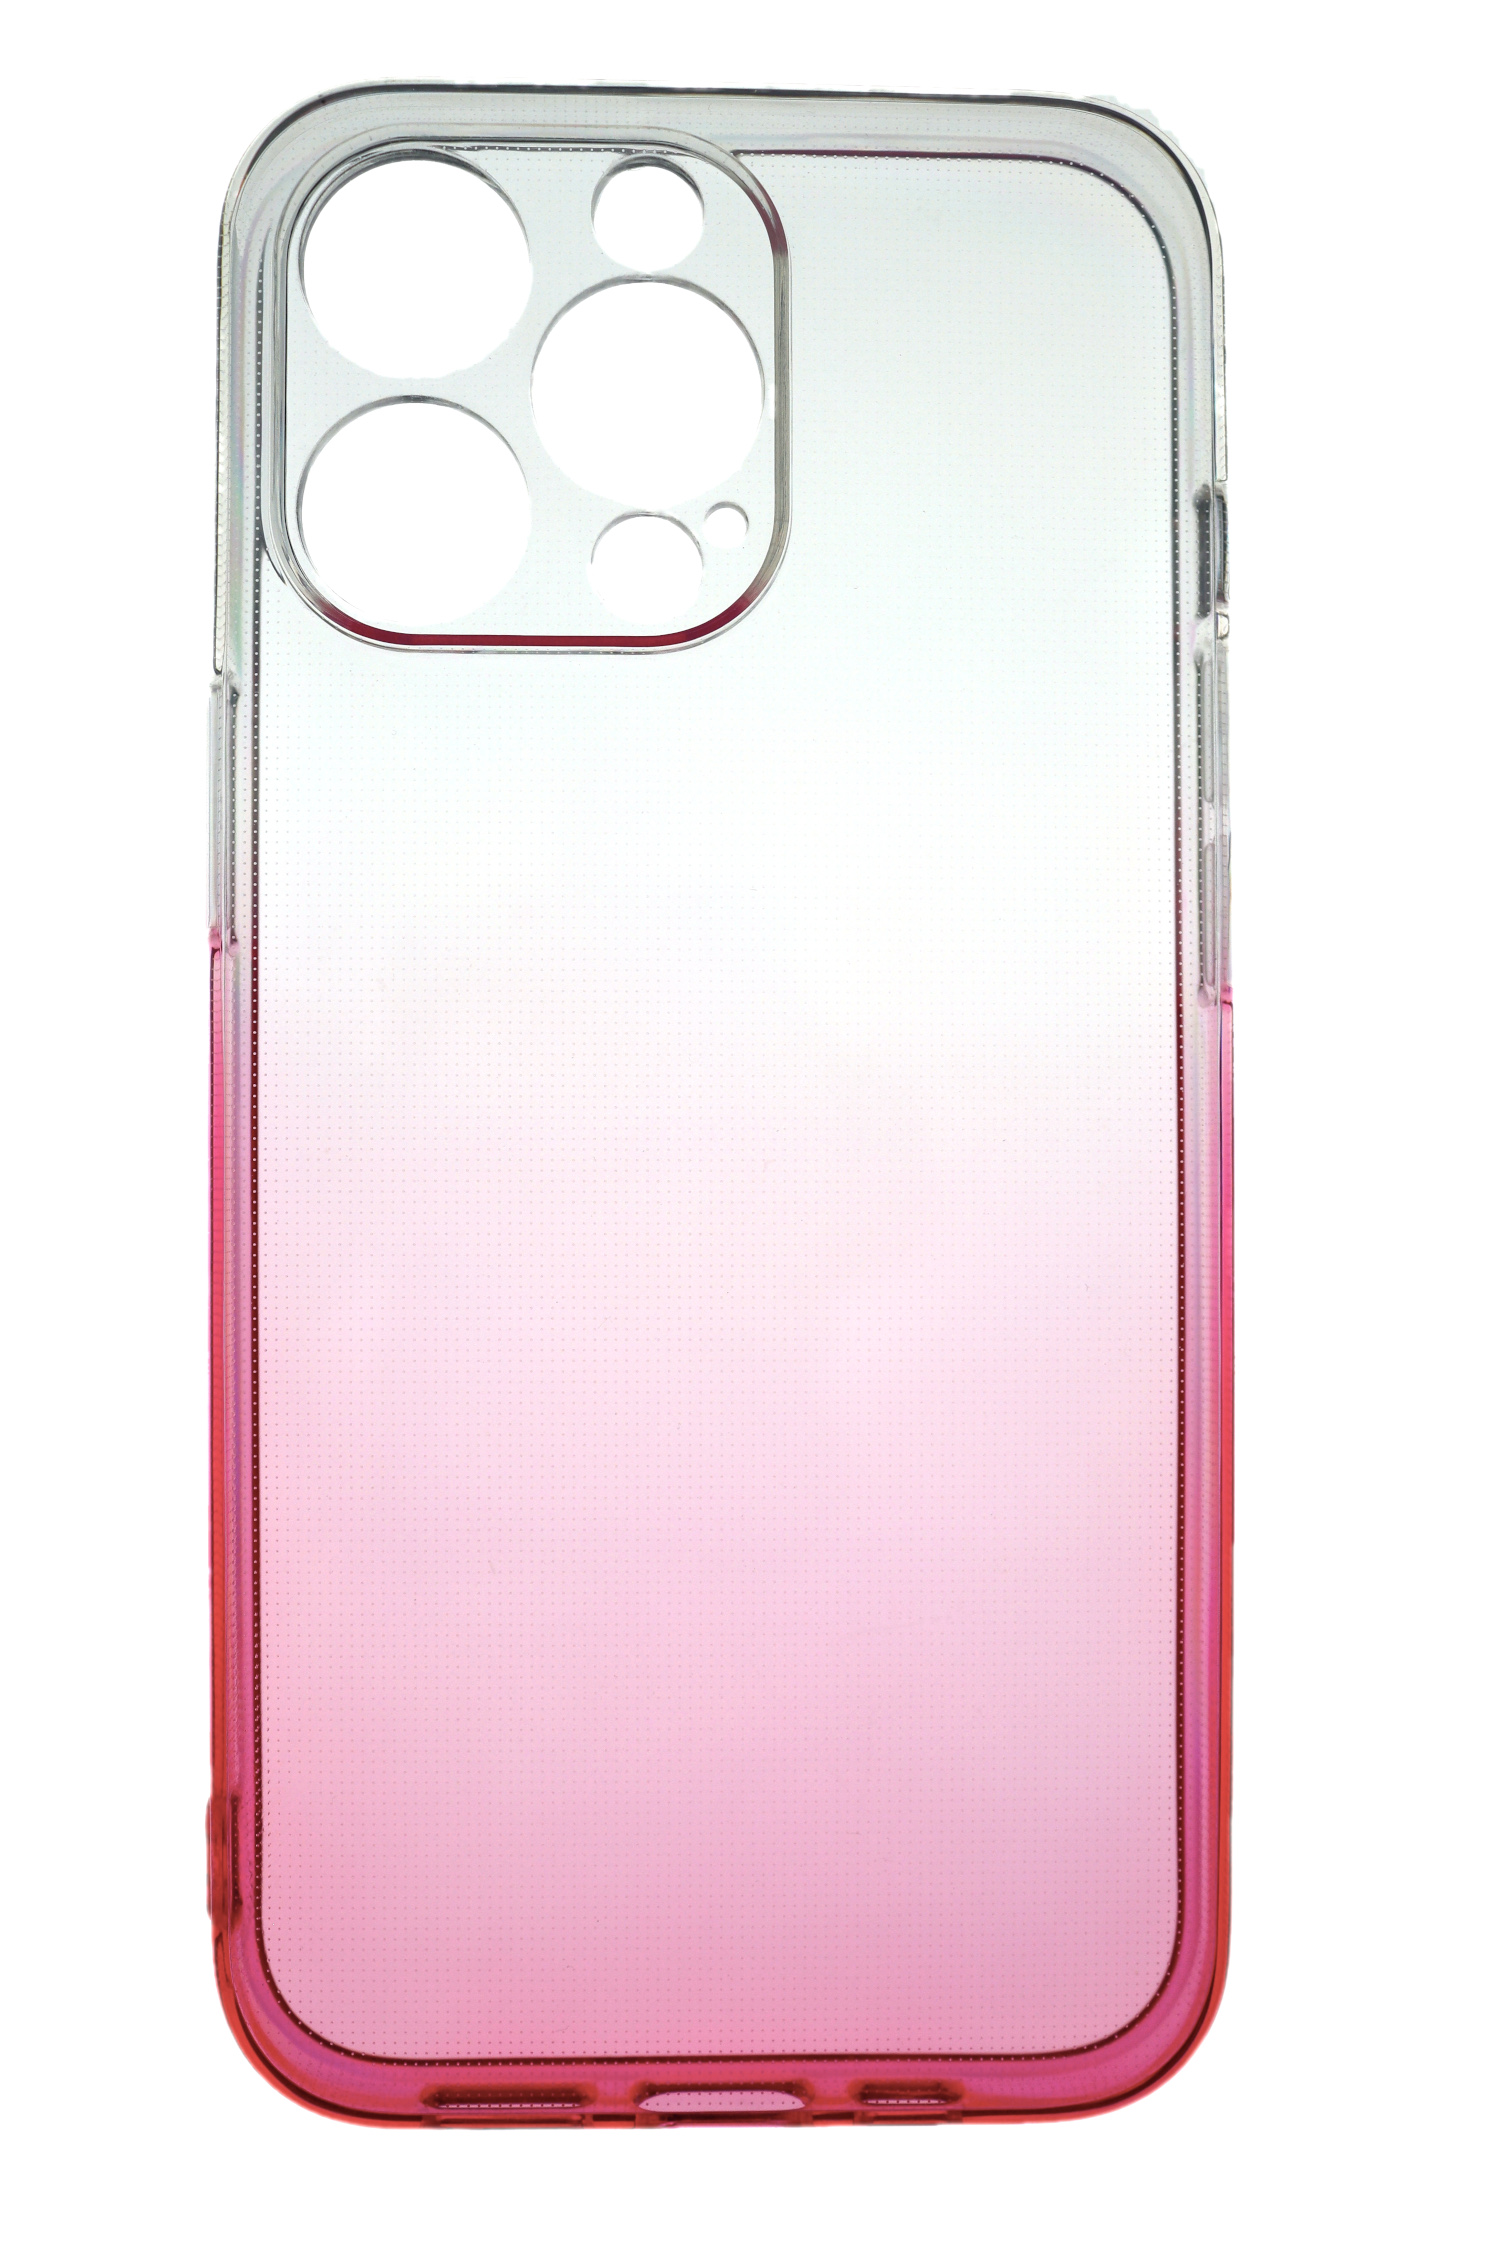 2.0 Pink, Transparent Case mm Apple, JAMCOVER Max, Strong, 13 TPU iPhone Pro Backcover,